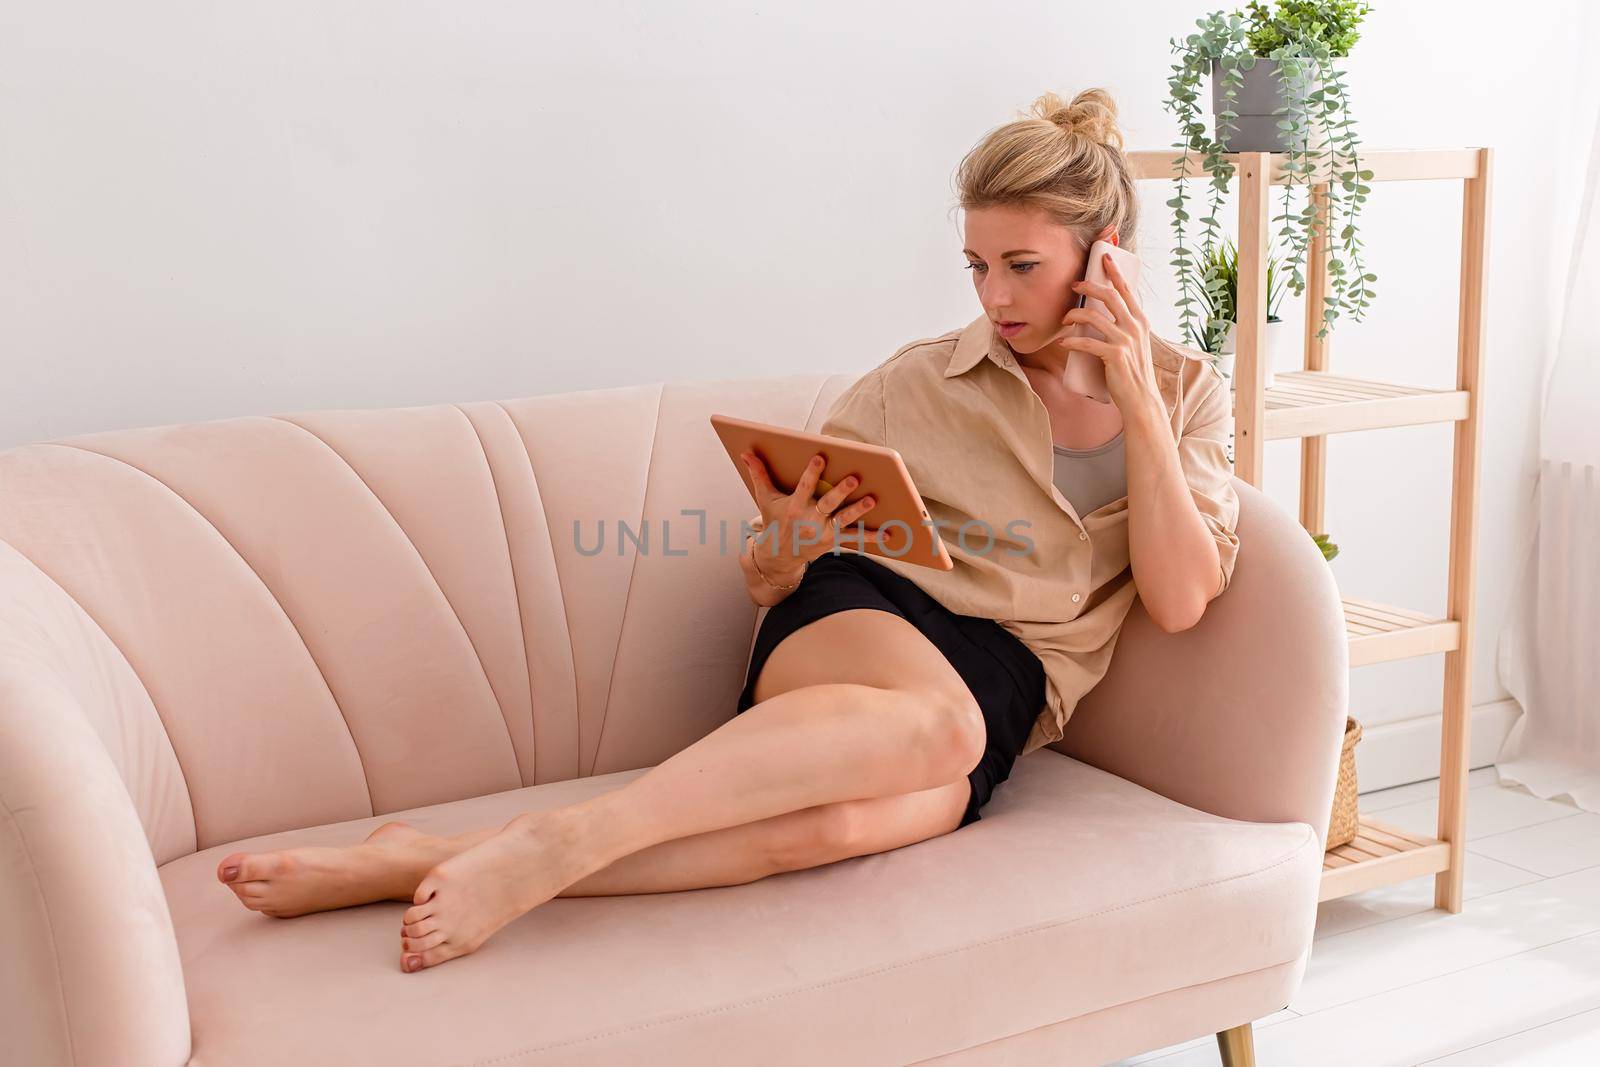 Blonde woman, 30-40 years old, looking at a digital tablet and talking on a mobile phone while lying comfortably on a beige sofa in a bright living room.